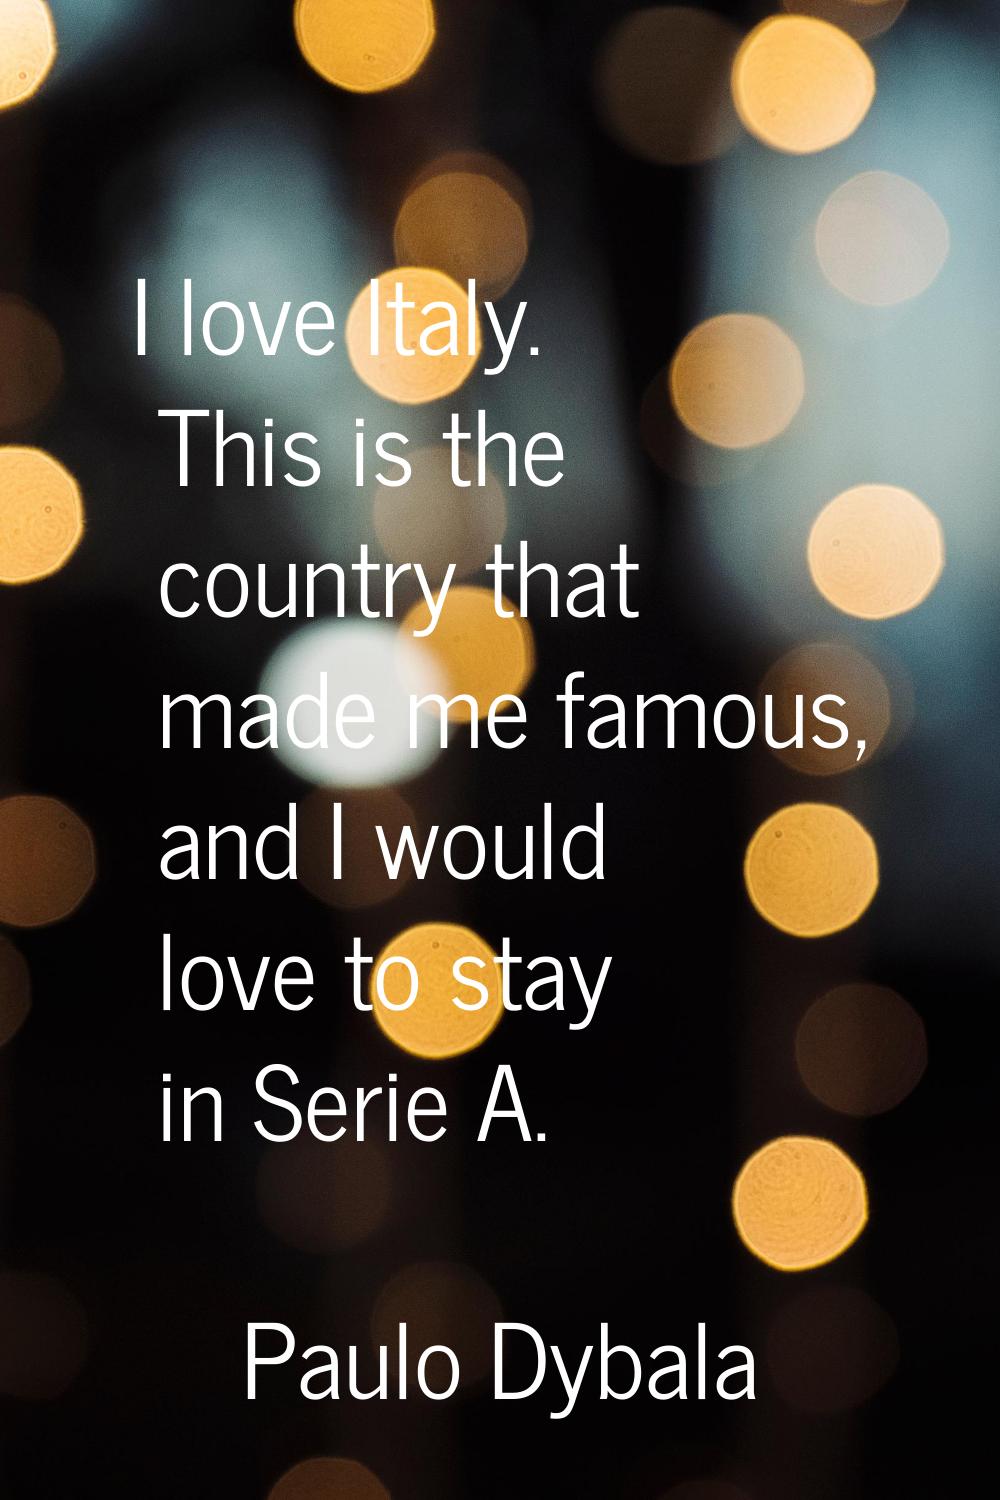 I love Italy. This is the country that made me famous, and I would love to stay in Serie A.